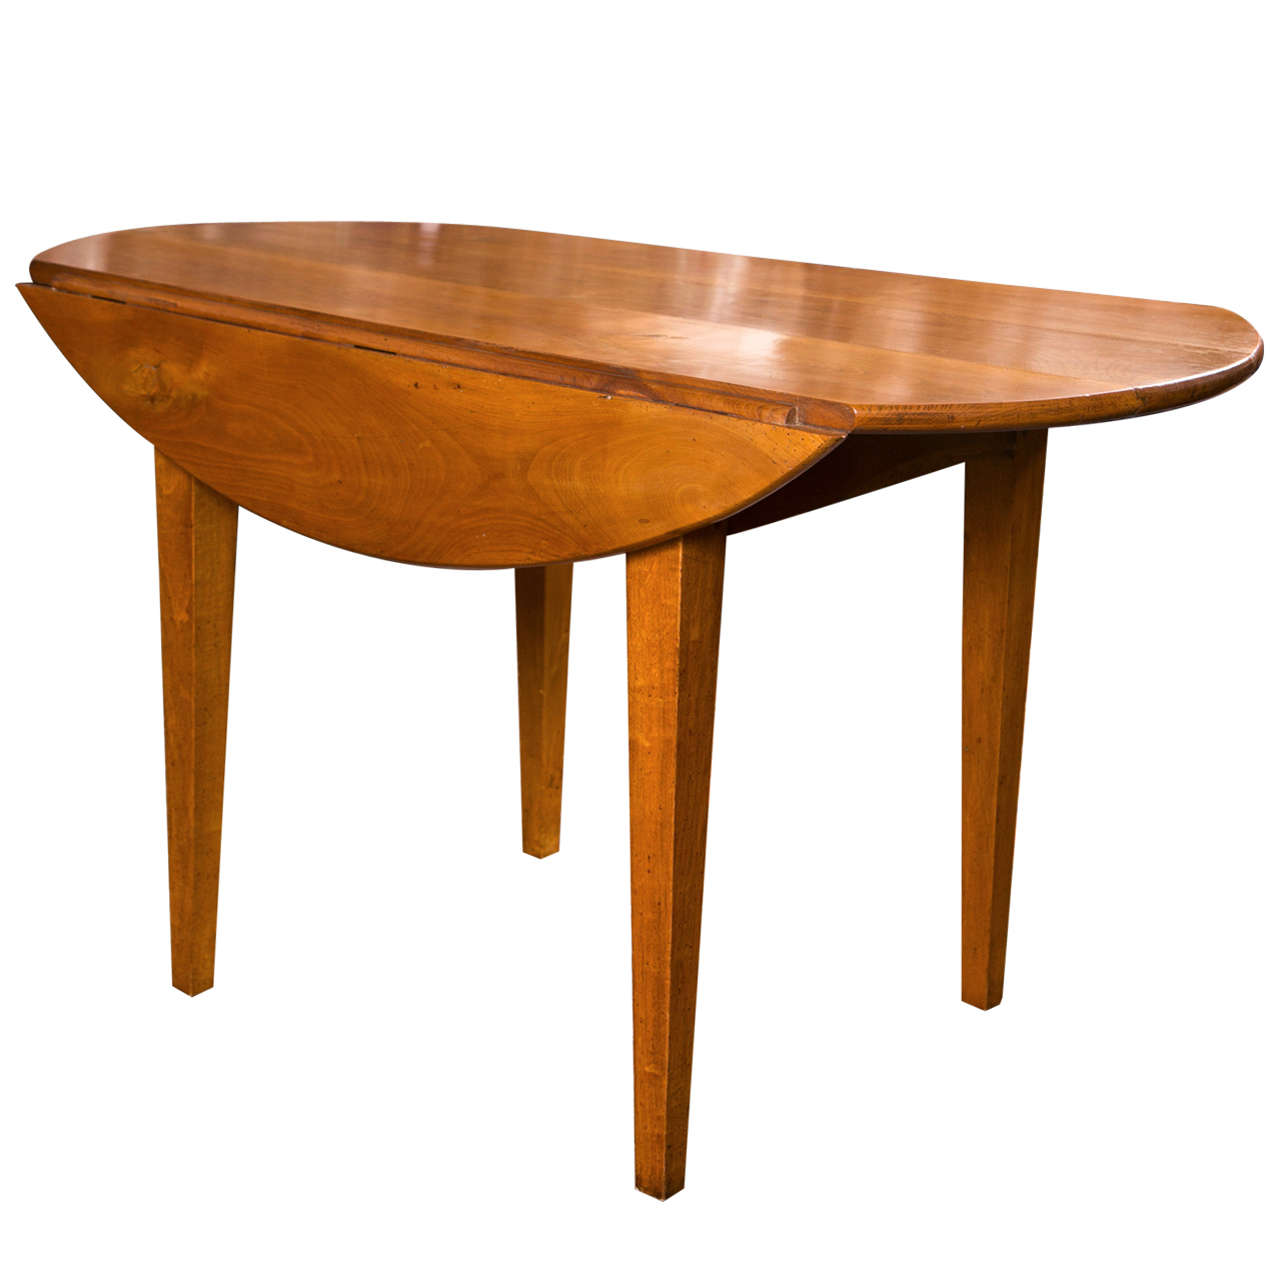 This cherry drop-leaf table is the perfect size for that country kitchen breakfast nook. Its gentle 51